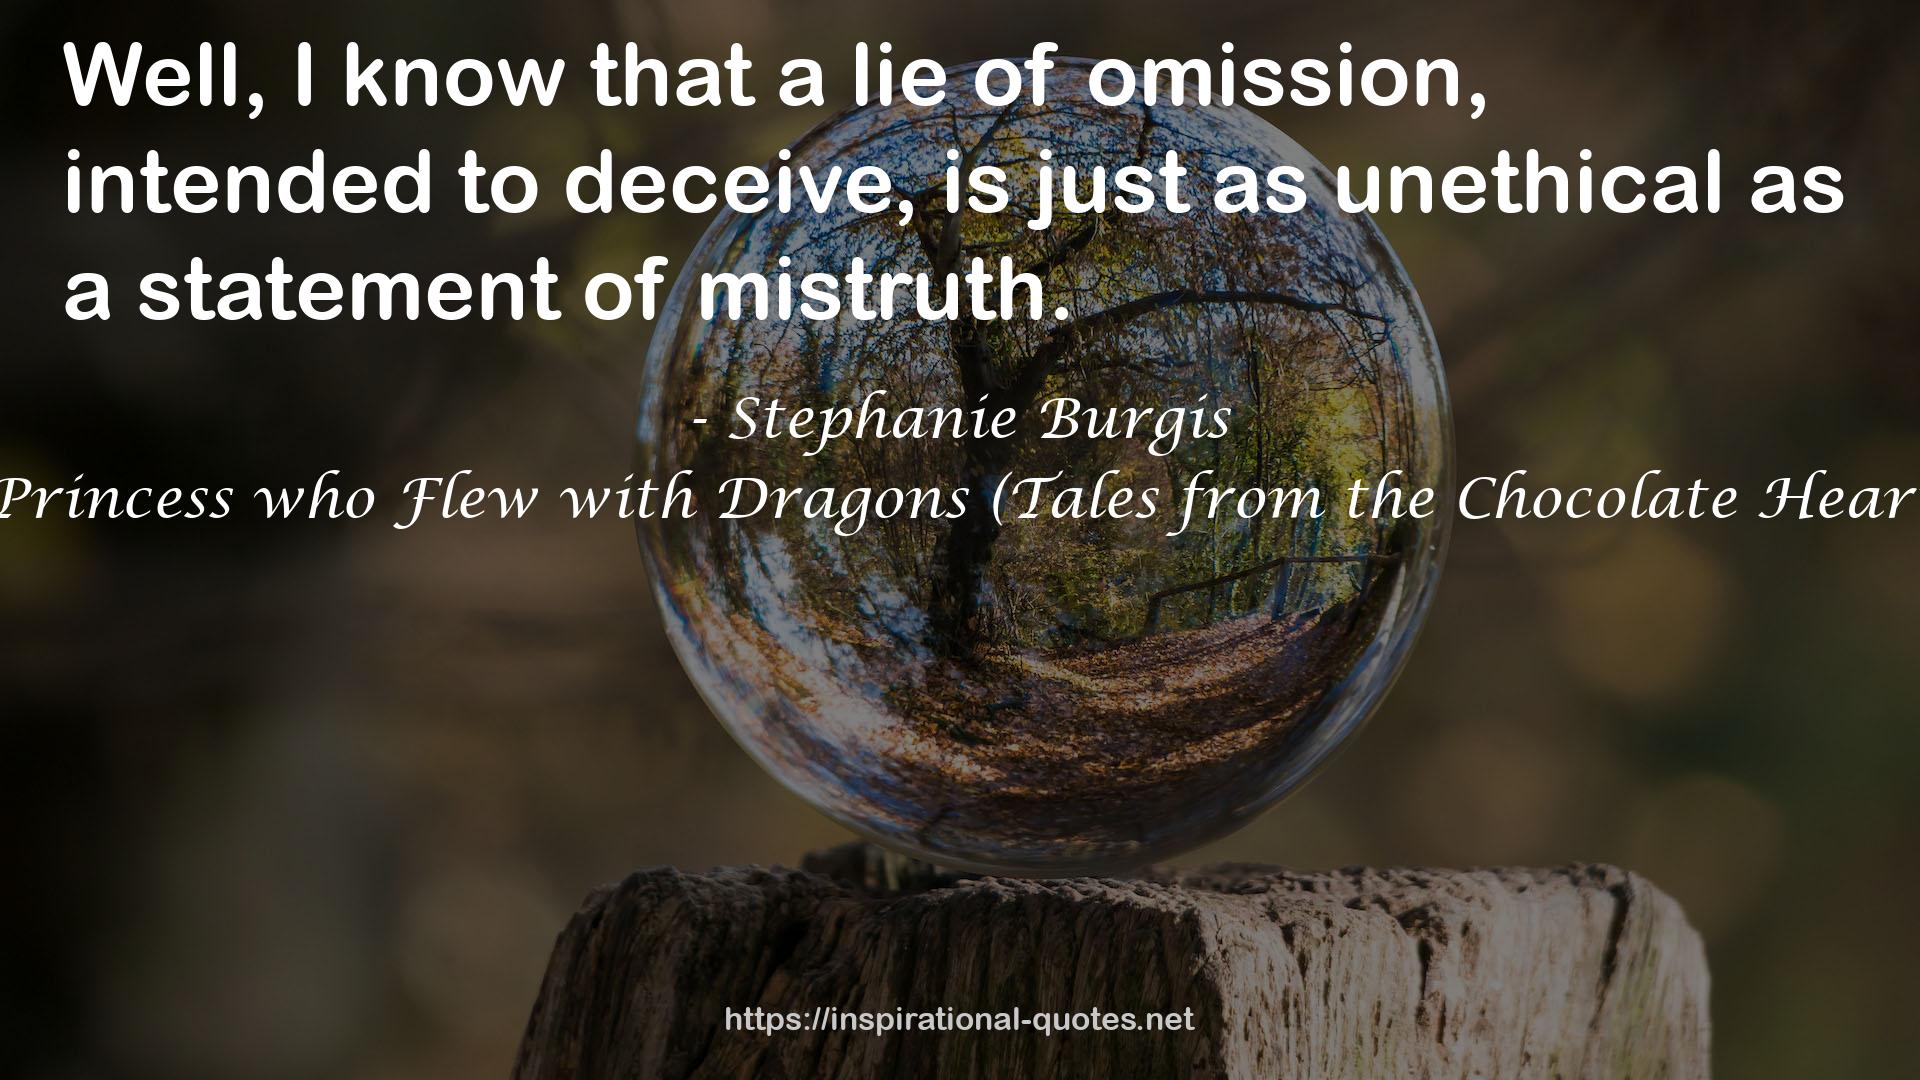 The Princess who Flew with Dragons (Tales from the Chocolate Heart, #3) QUOTES